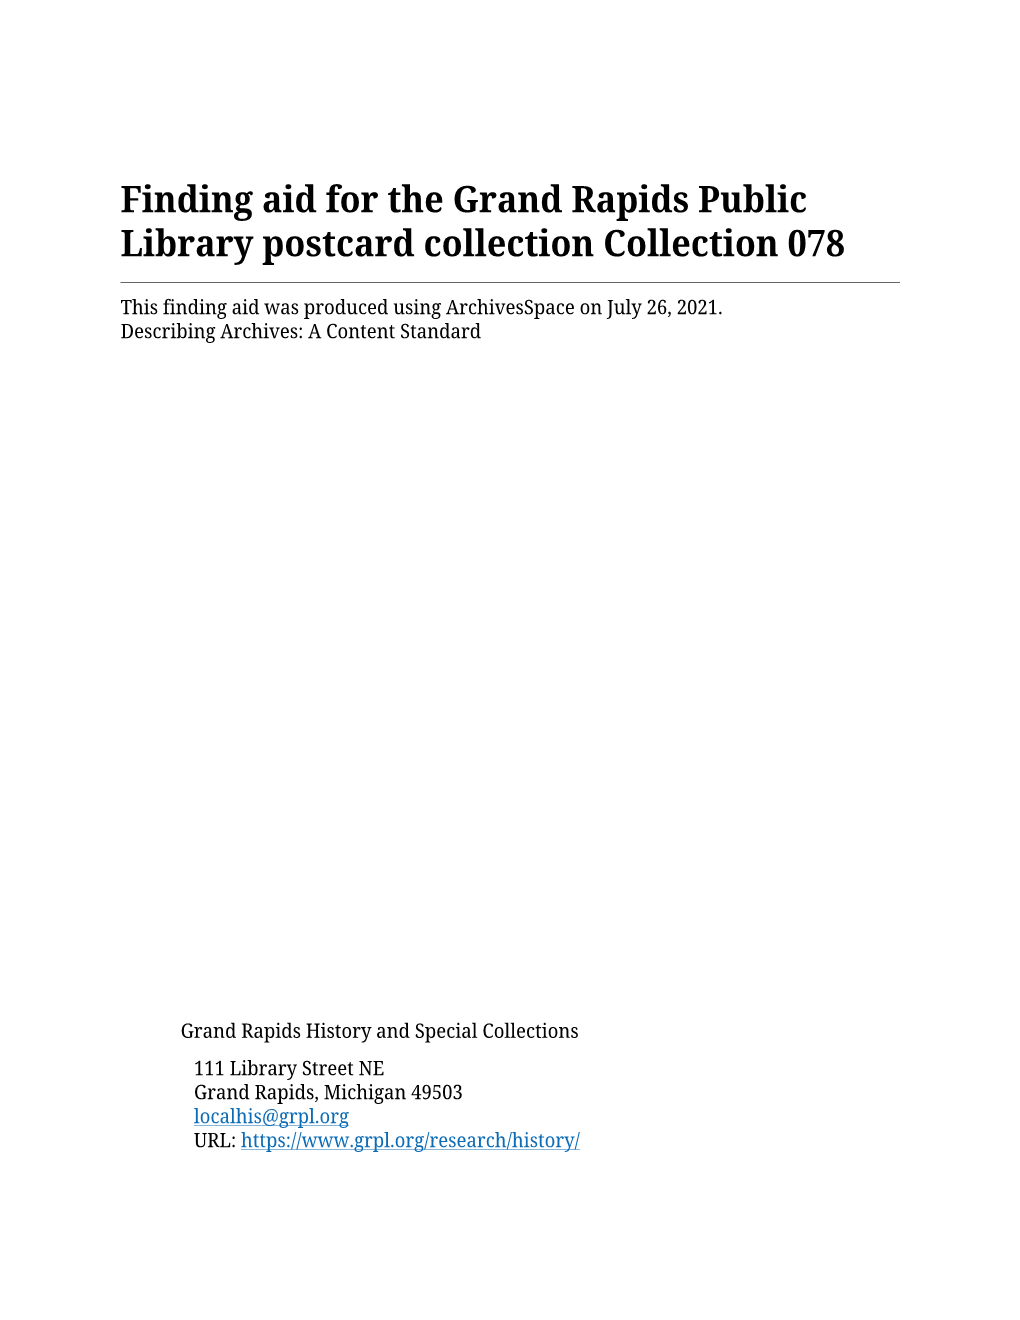 Finding Aid for the Grand Rapids Public Library Postcard Collection Collection 078